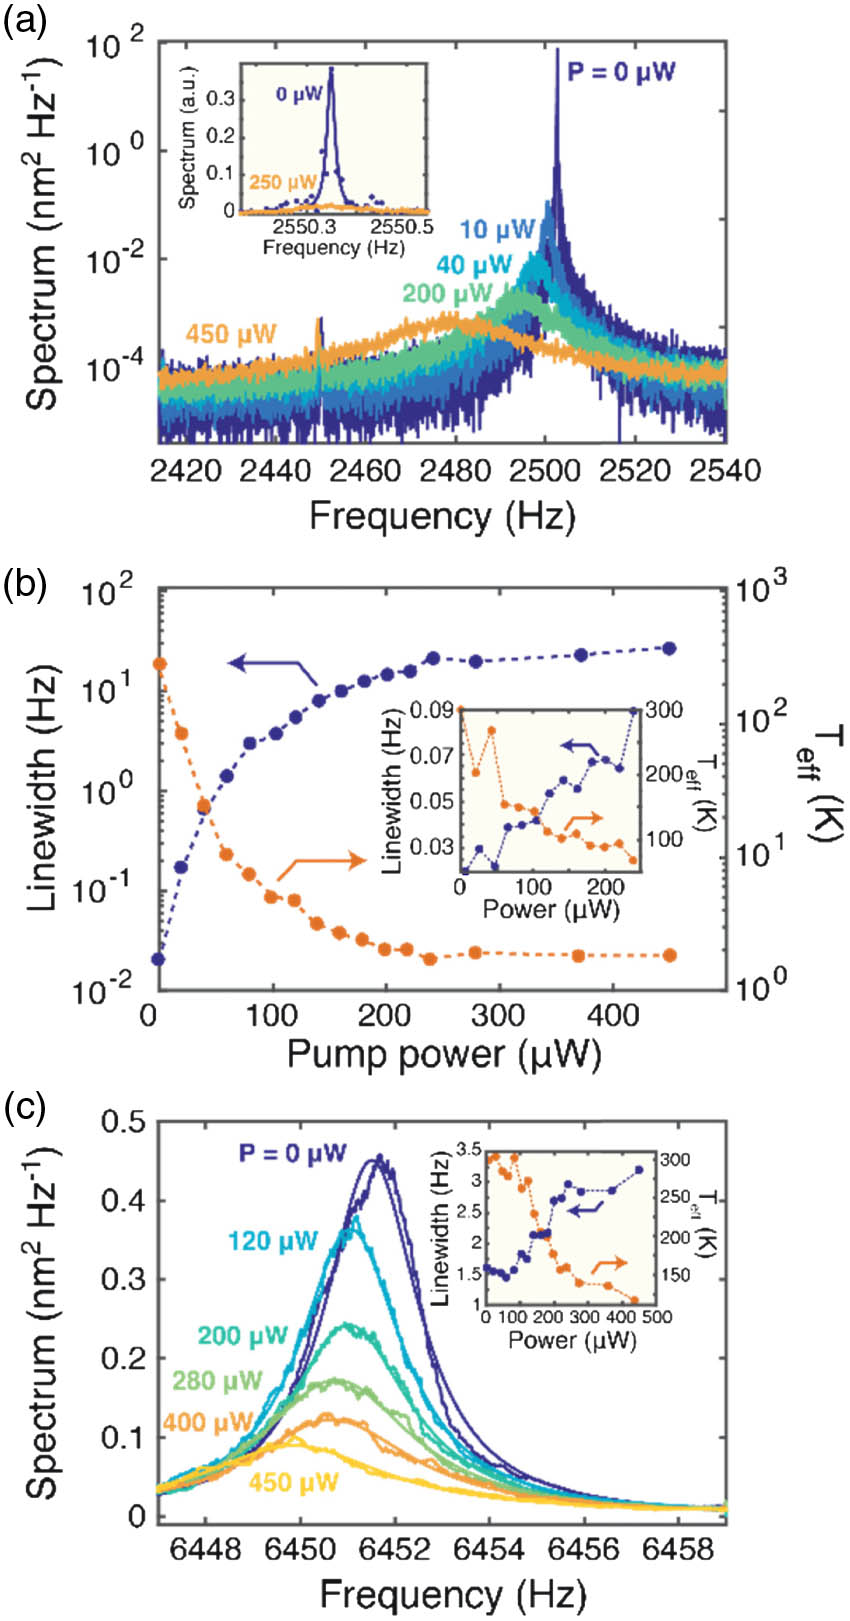 Optomechanical cooling of nanospike motion. (a) Measured mechanical power spectrum in the vicinity of the fundamental (flexural) nanospike mode for five different pump powers. Inset: measured power spectrum for vibrations parallel to the surface (see text) for 0 and 250 μW pump power. The solid lines are Lorentzian fits. (b) Mechanical linewidth (left axis) and inferred effective temperature Teff (right axis) as a function of pump power. The dashed lines are guides for the eye. Inset: same measurement as in (b) but for vibrations parallel to the surface. (c) Measured mechanical power spectra in the vicinity of the first high order (flexural) nanospike mode for increasing values of pump power. The solid lines are Lorentzian fits. Inset: linewidth (left axis) and effective temperature Teff (right axis) of the same mechanical mode as a function of the pump power.